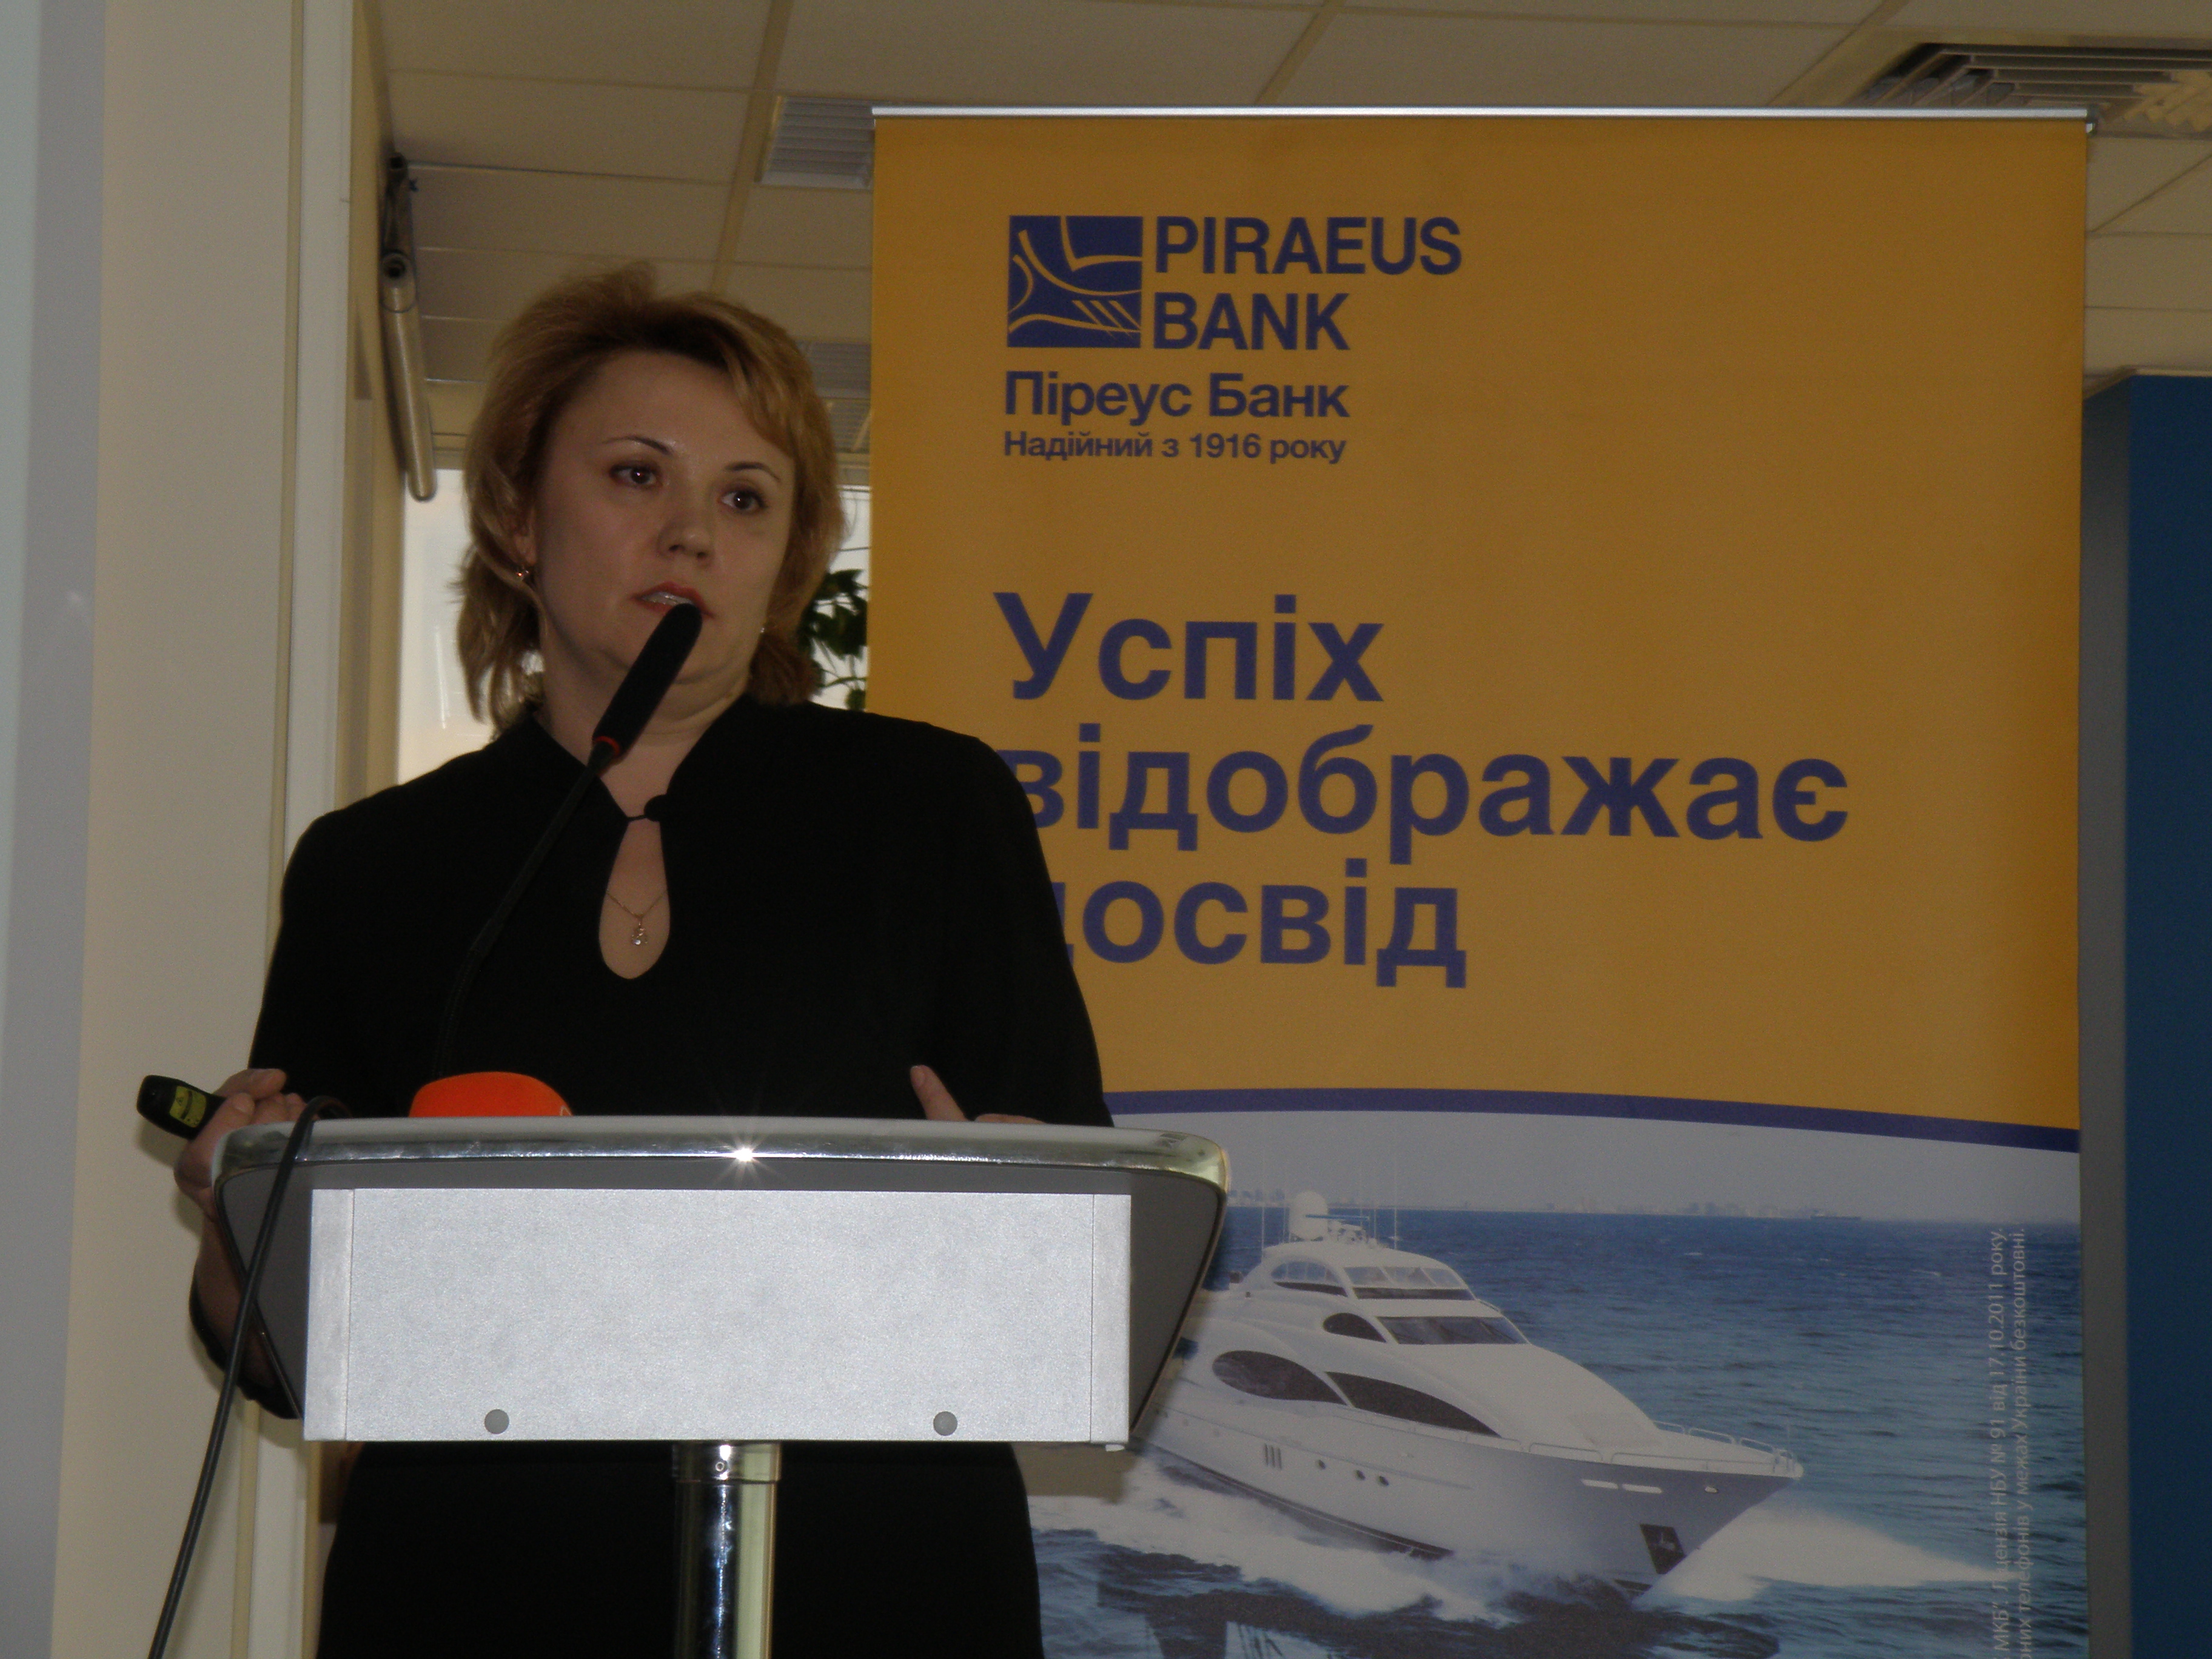 Tatyana Kochereva, Piraeus Bank in Ukraine area manager: "Tha goal of Piraeus Bank is to help the enterpreuners to use financial instruments in the most effective way"